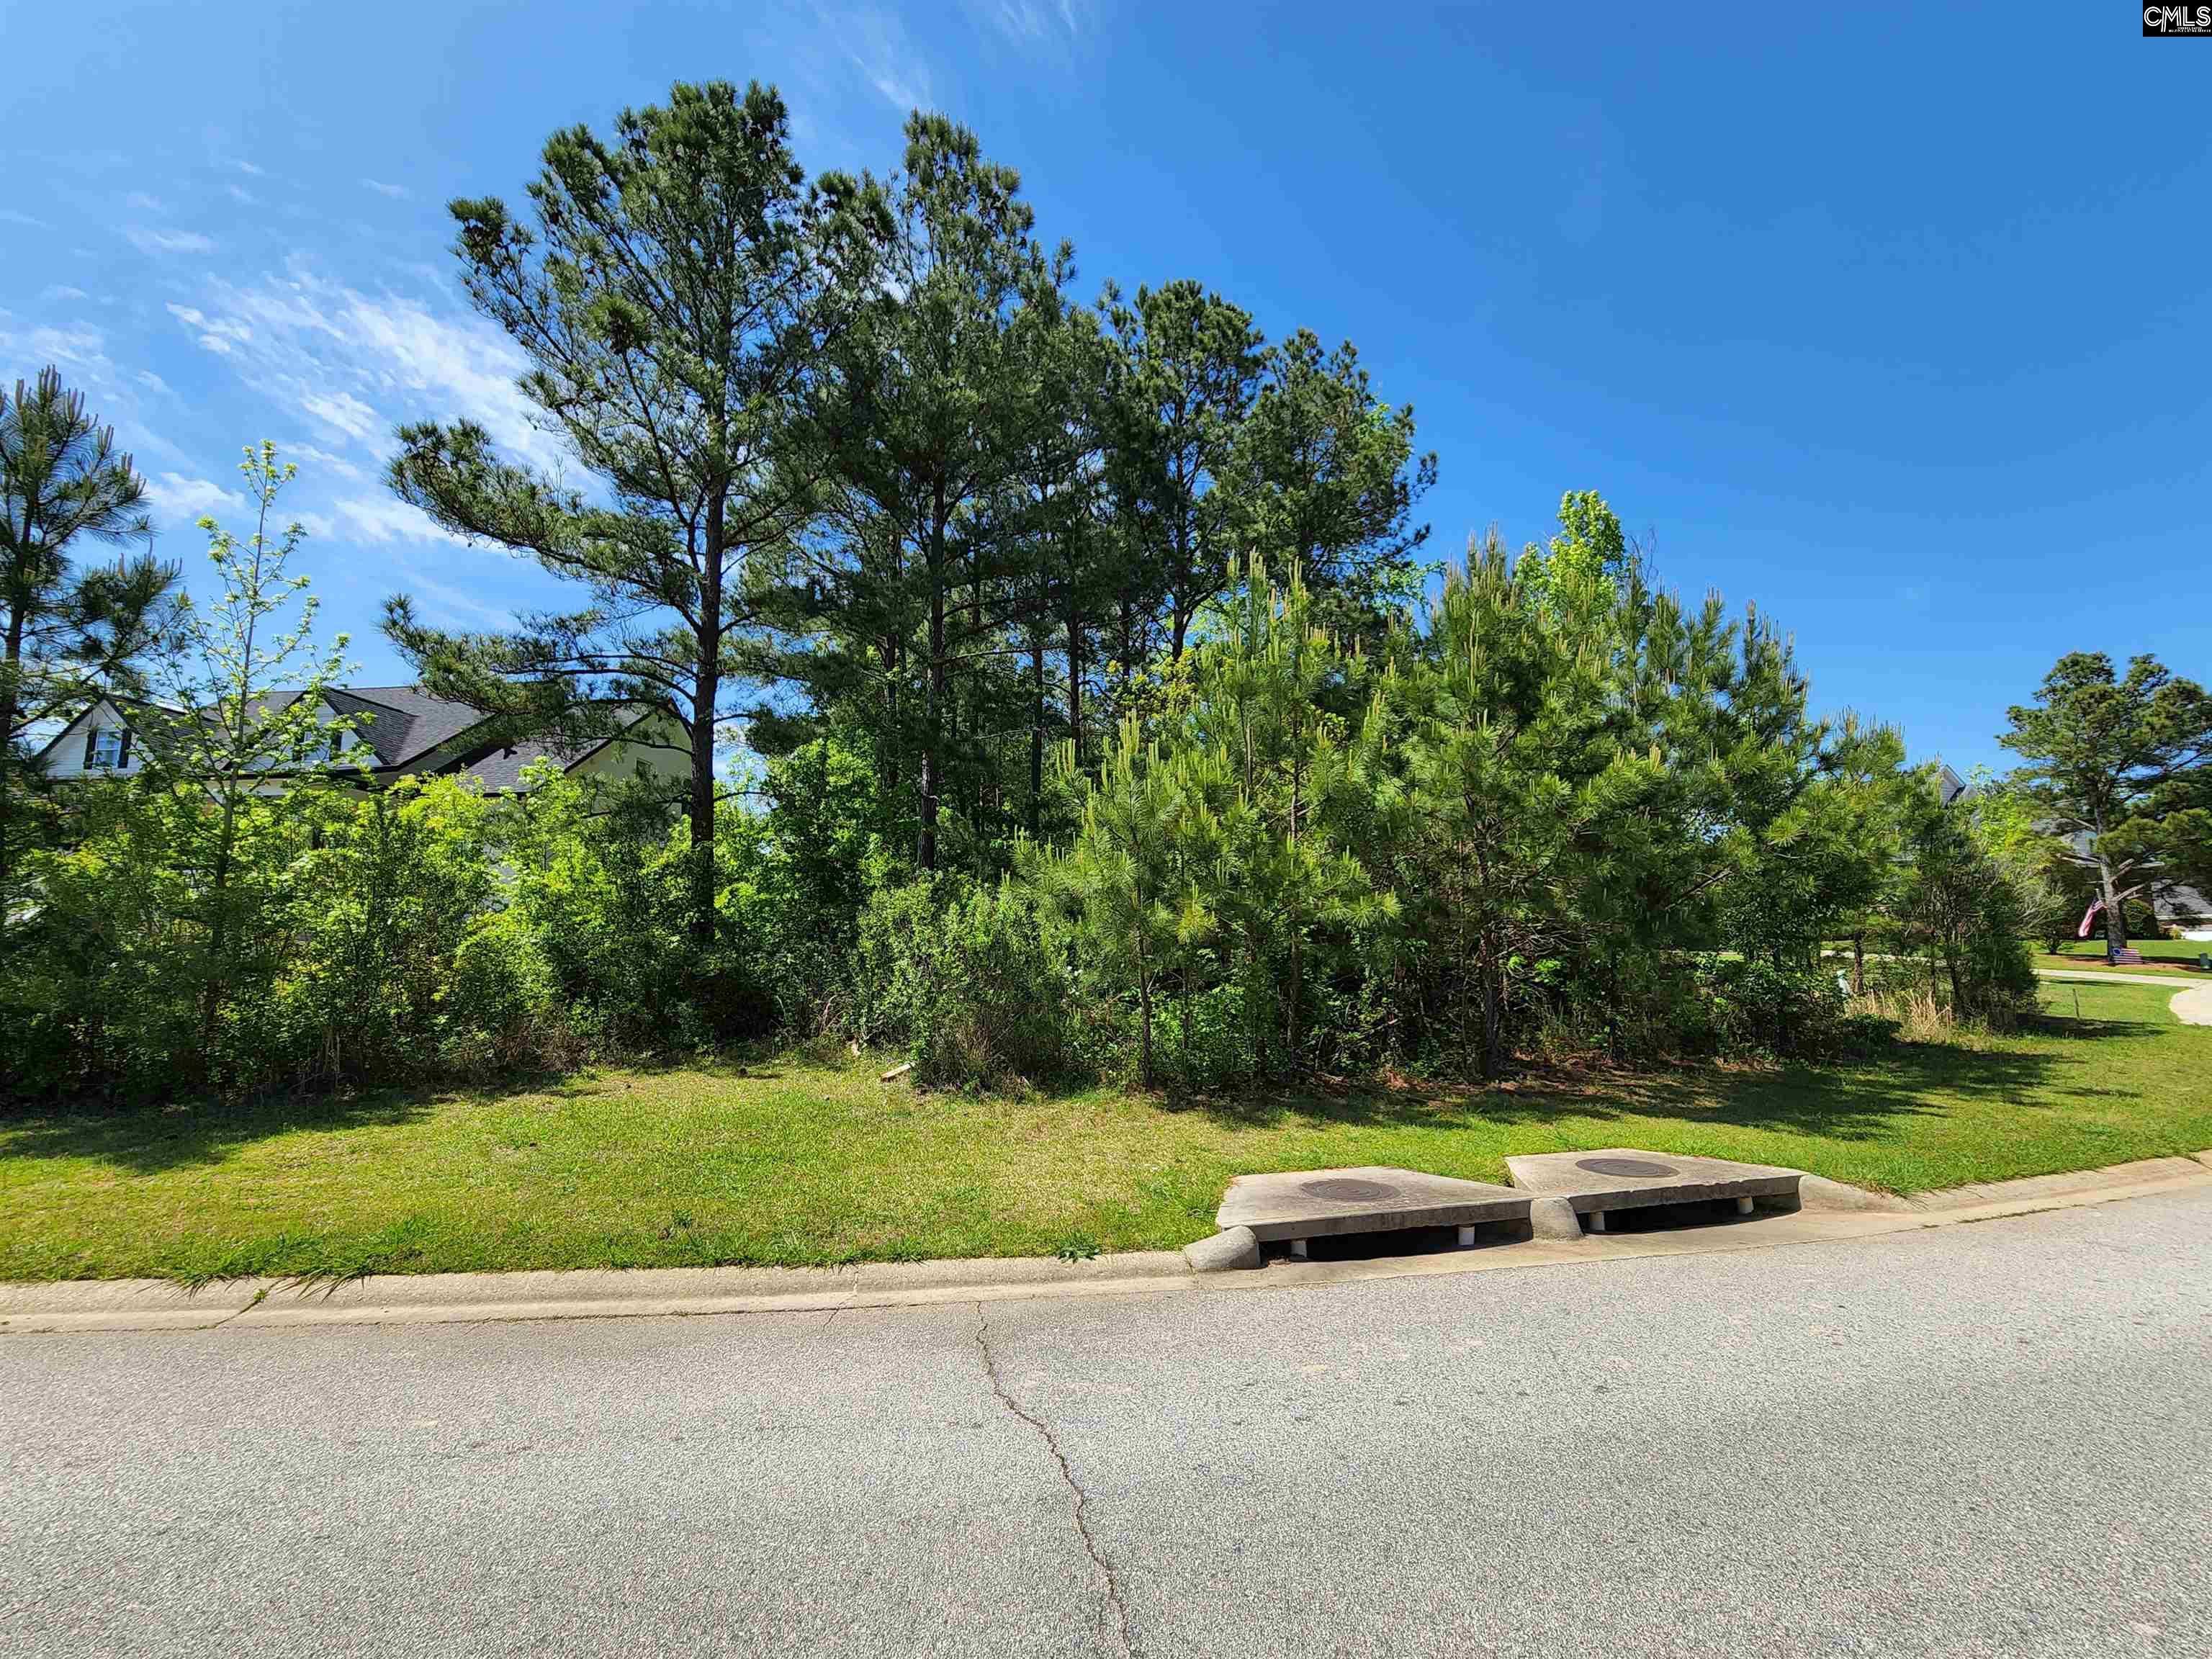 Excellent building lot in desirable Pintail Point; an amenity-rich and architecturally-pleasing neighborhood on the south side of Lake Murray. Topping the list of neighborhood amenities is access to Lake Murray! When you're not out on your boat, enjoy the community clubhouse, pool, walking trails, and tennis courts. Min sf for your new build is 2,200 sf.